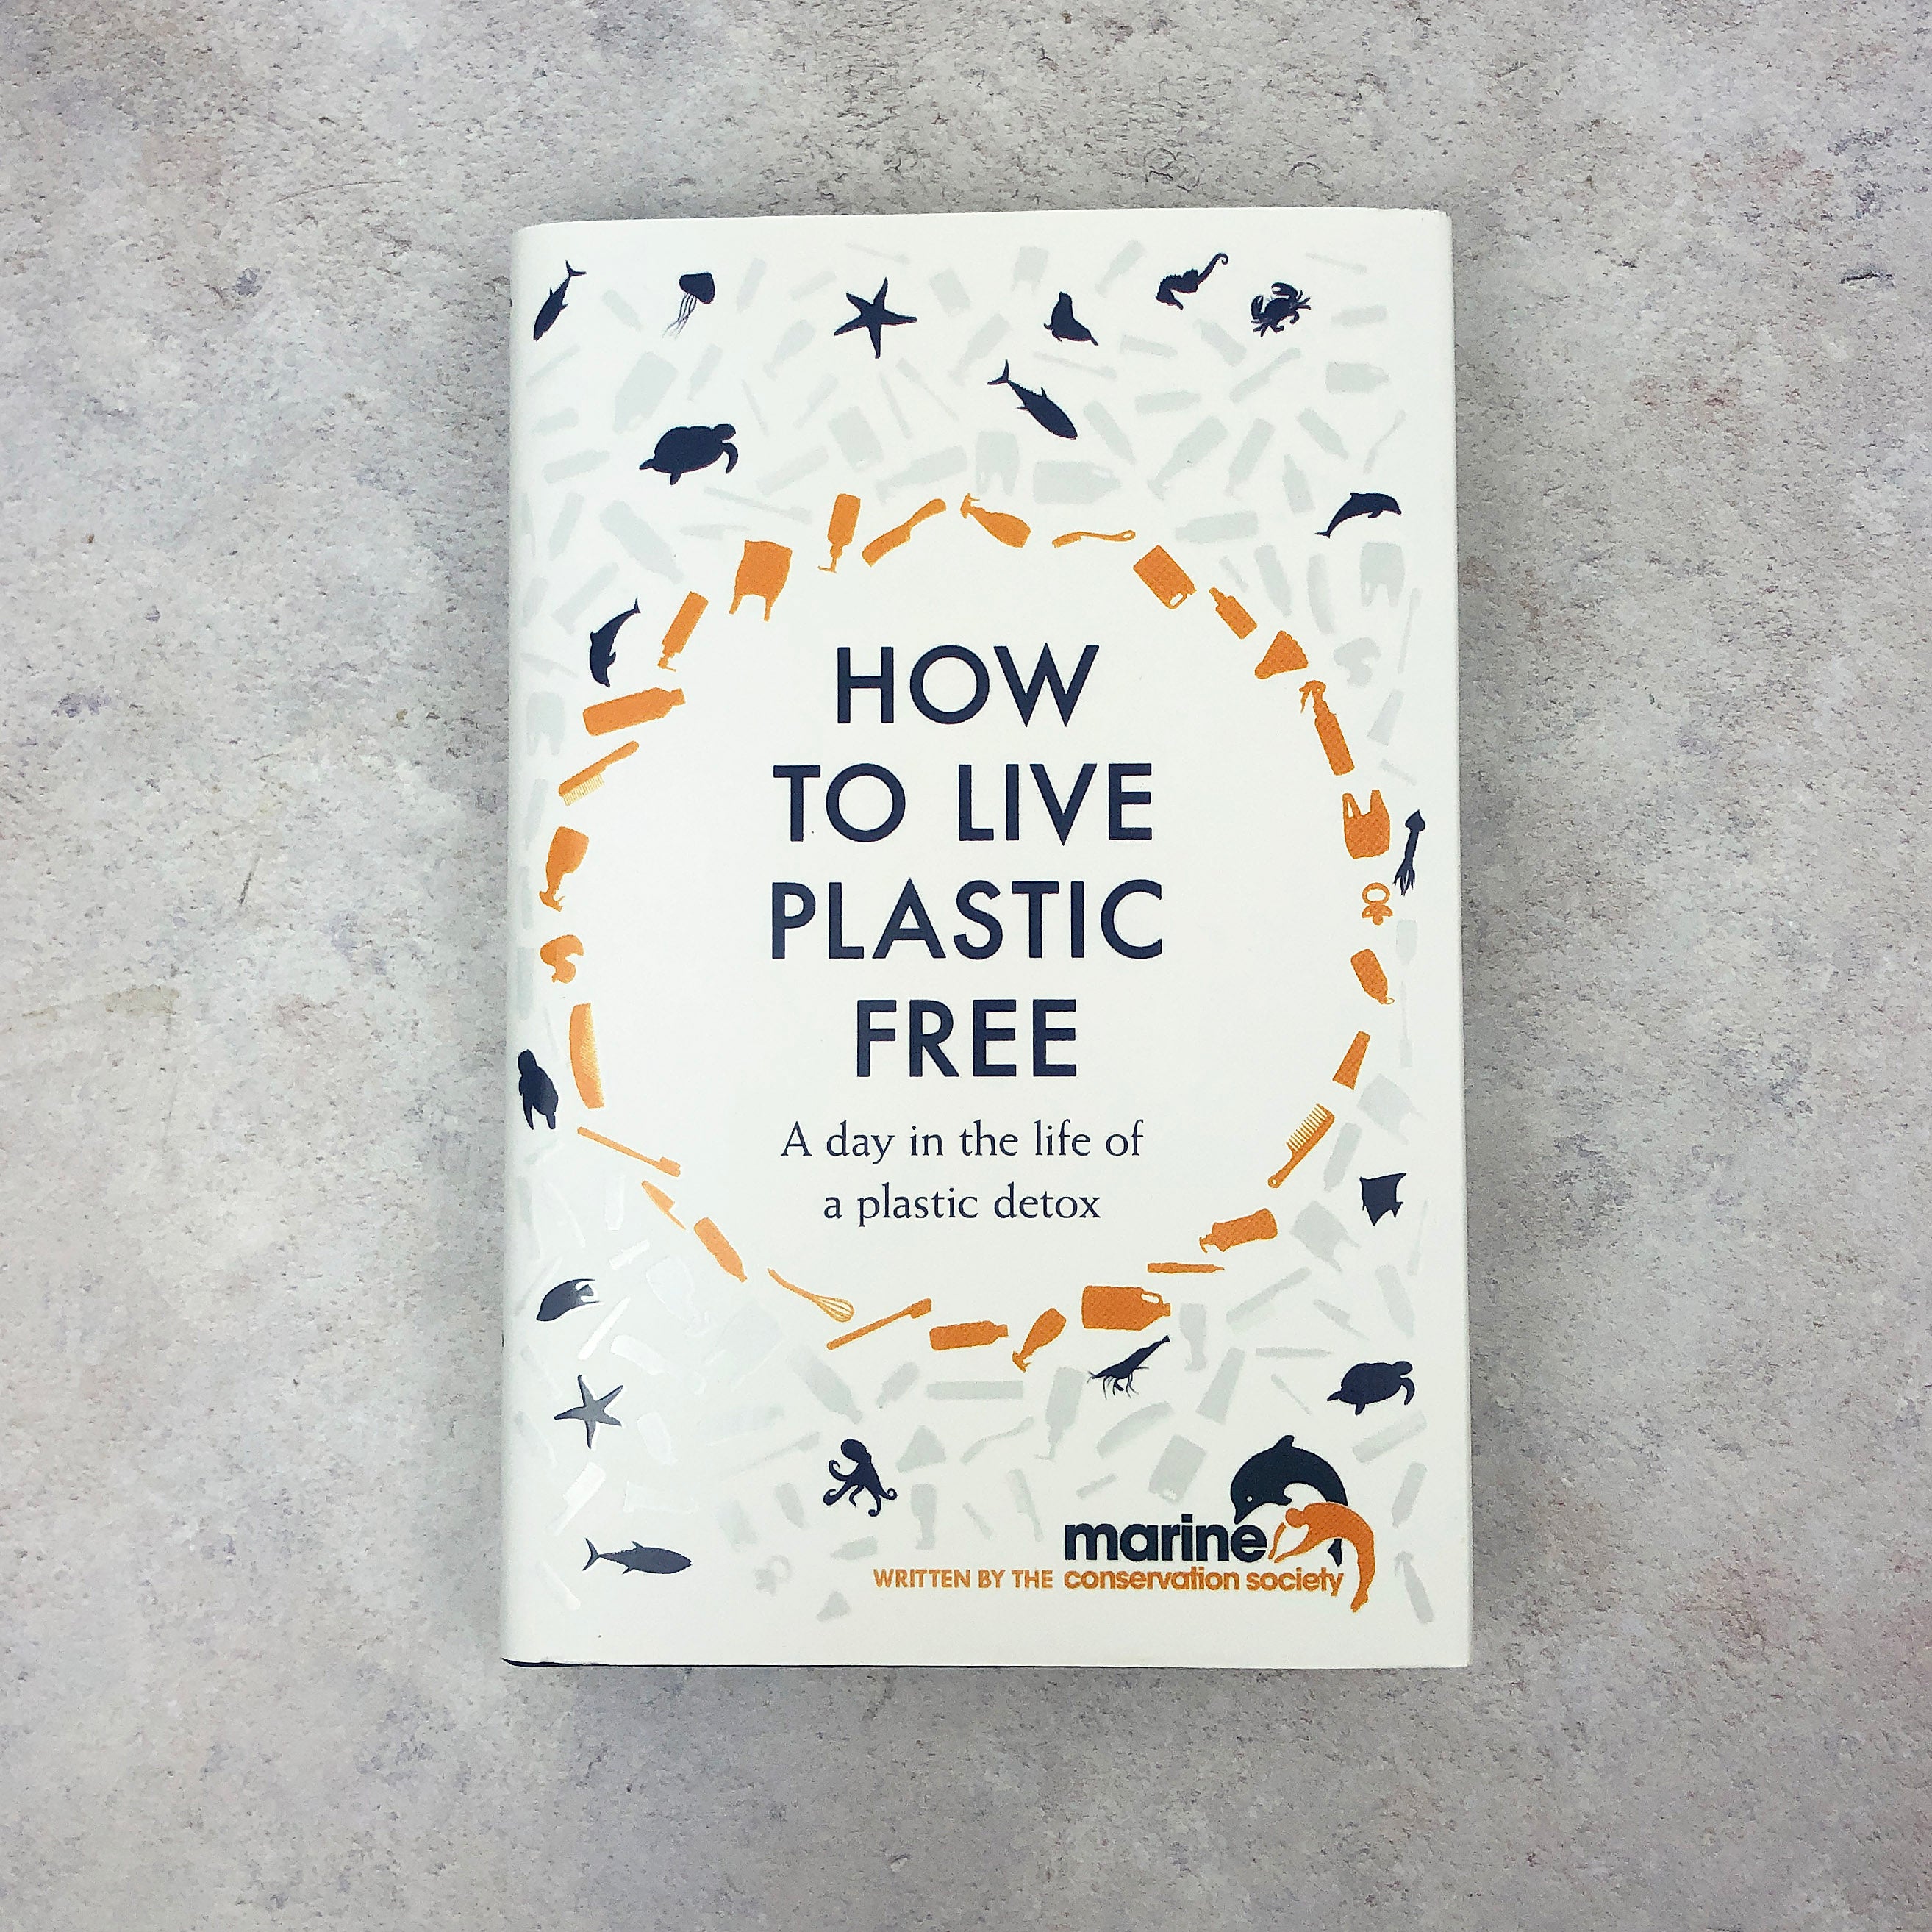 How To Live Plastic Free - Marine Conservation Society